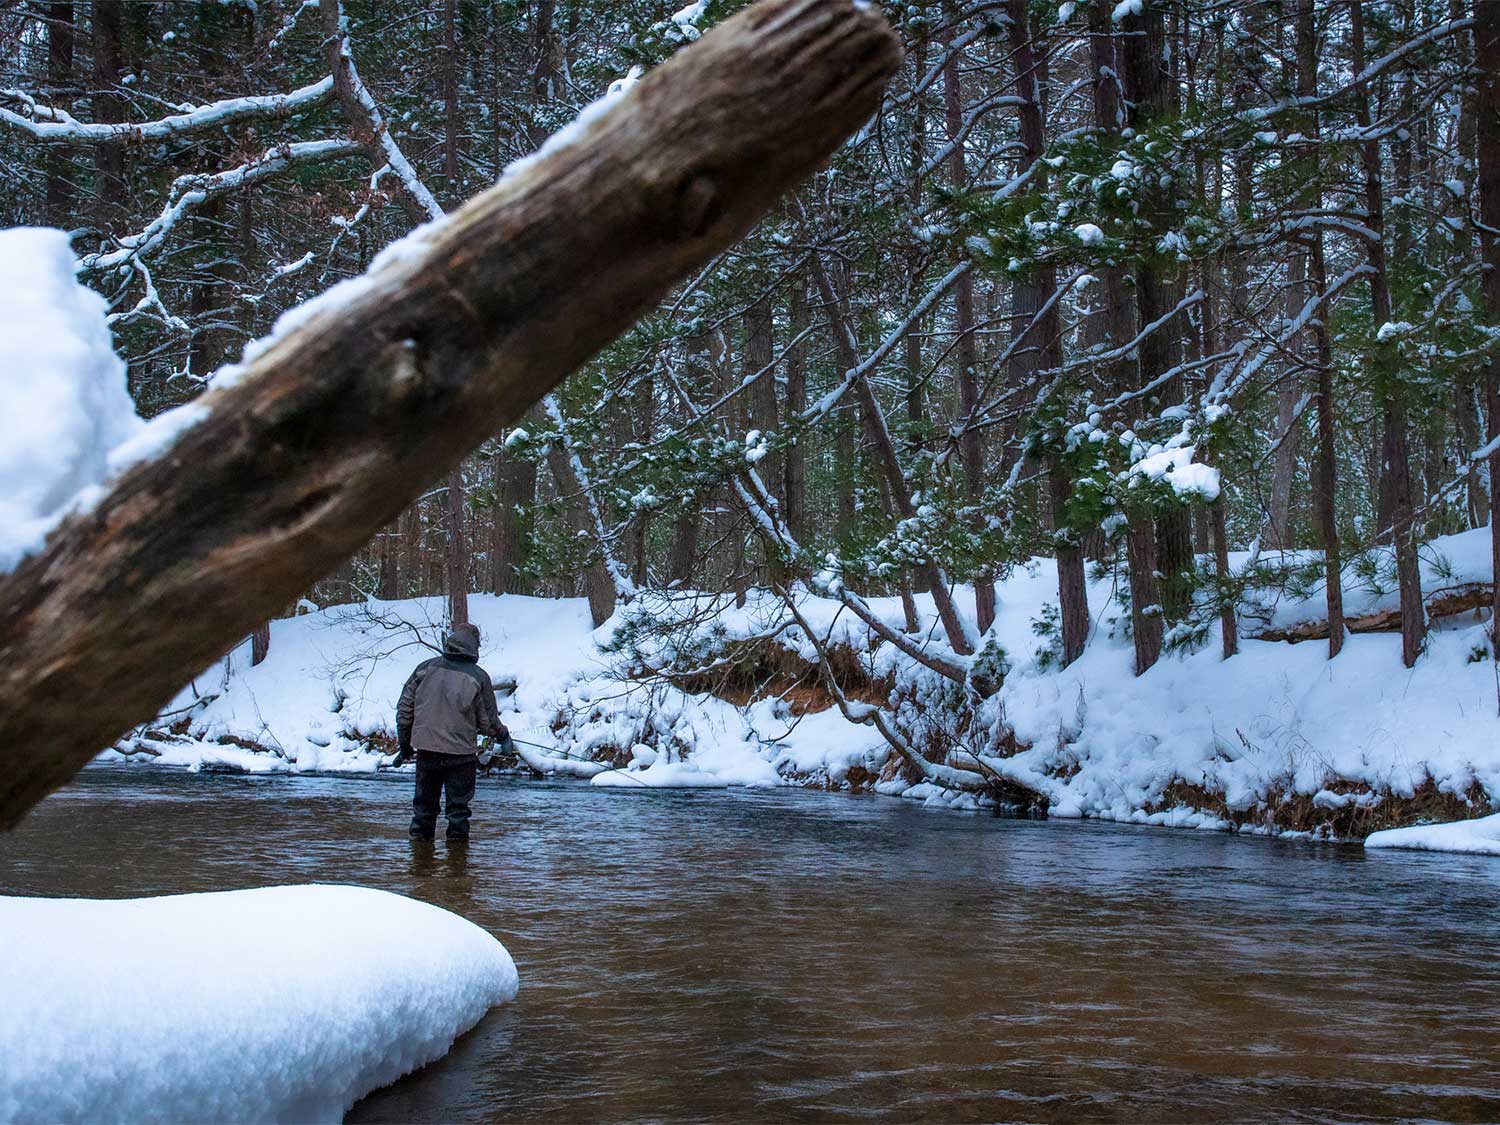 An angler wades into a river and fishes in the snow.